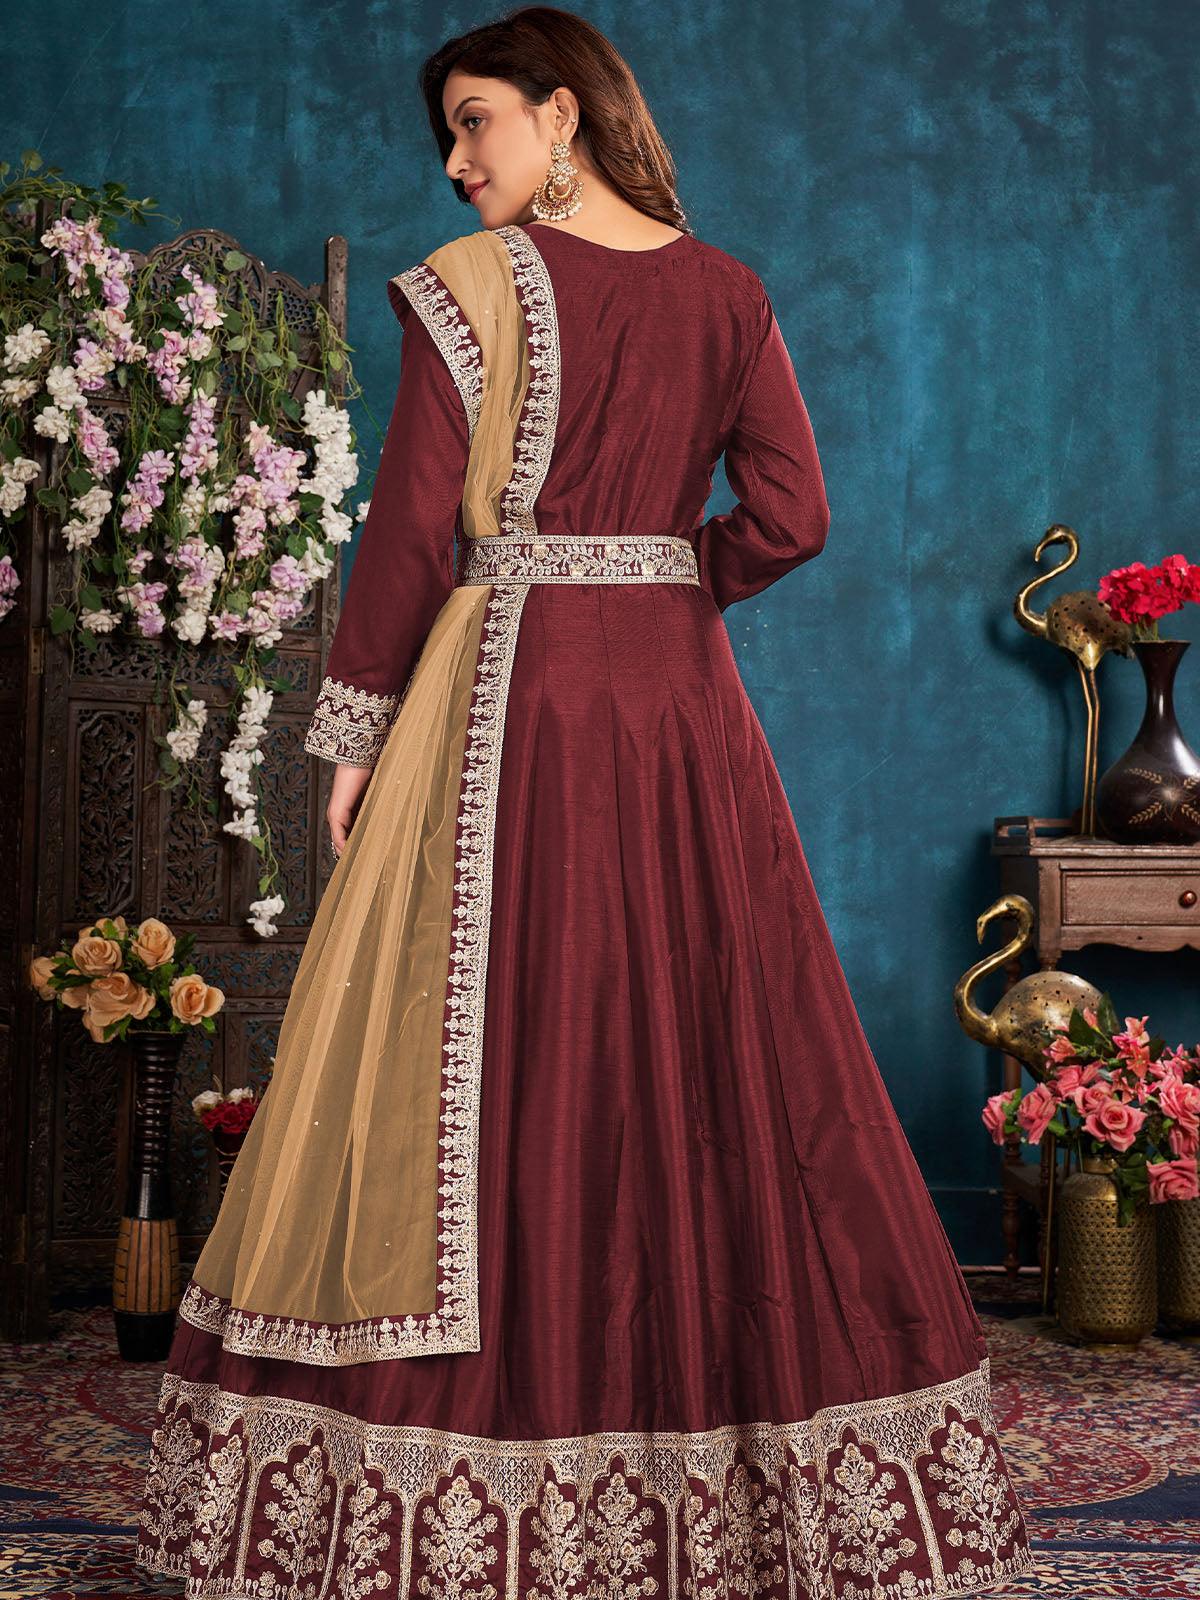 Swagat Semi-Stitched Designer Heavy Embroidered Net Anarkali Suit, Dry  clean at Rs 2995 in Surat